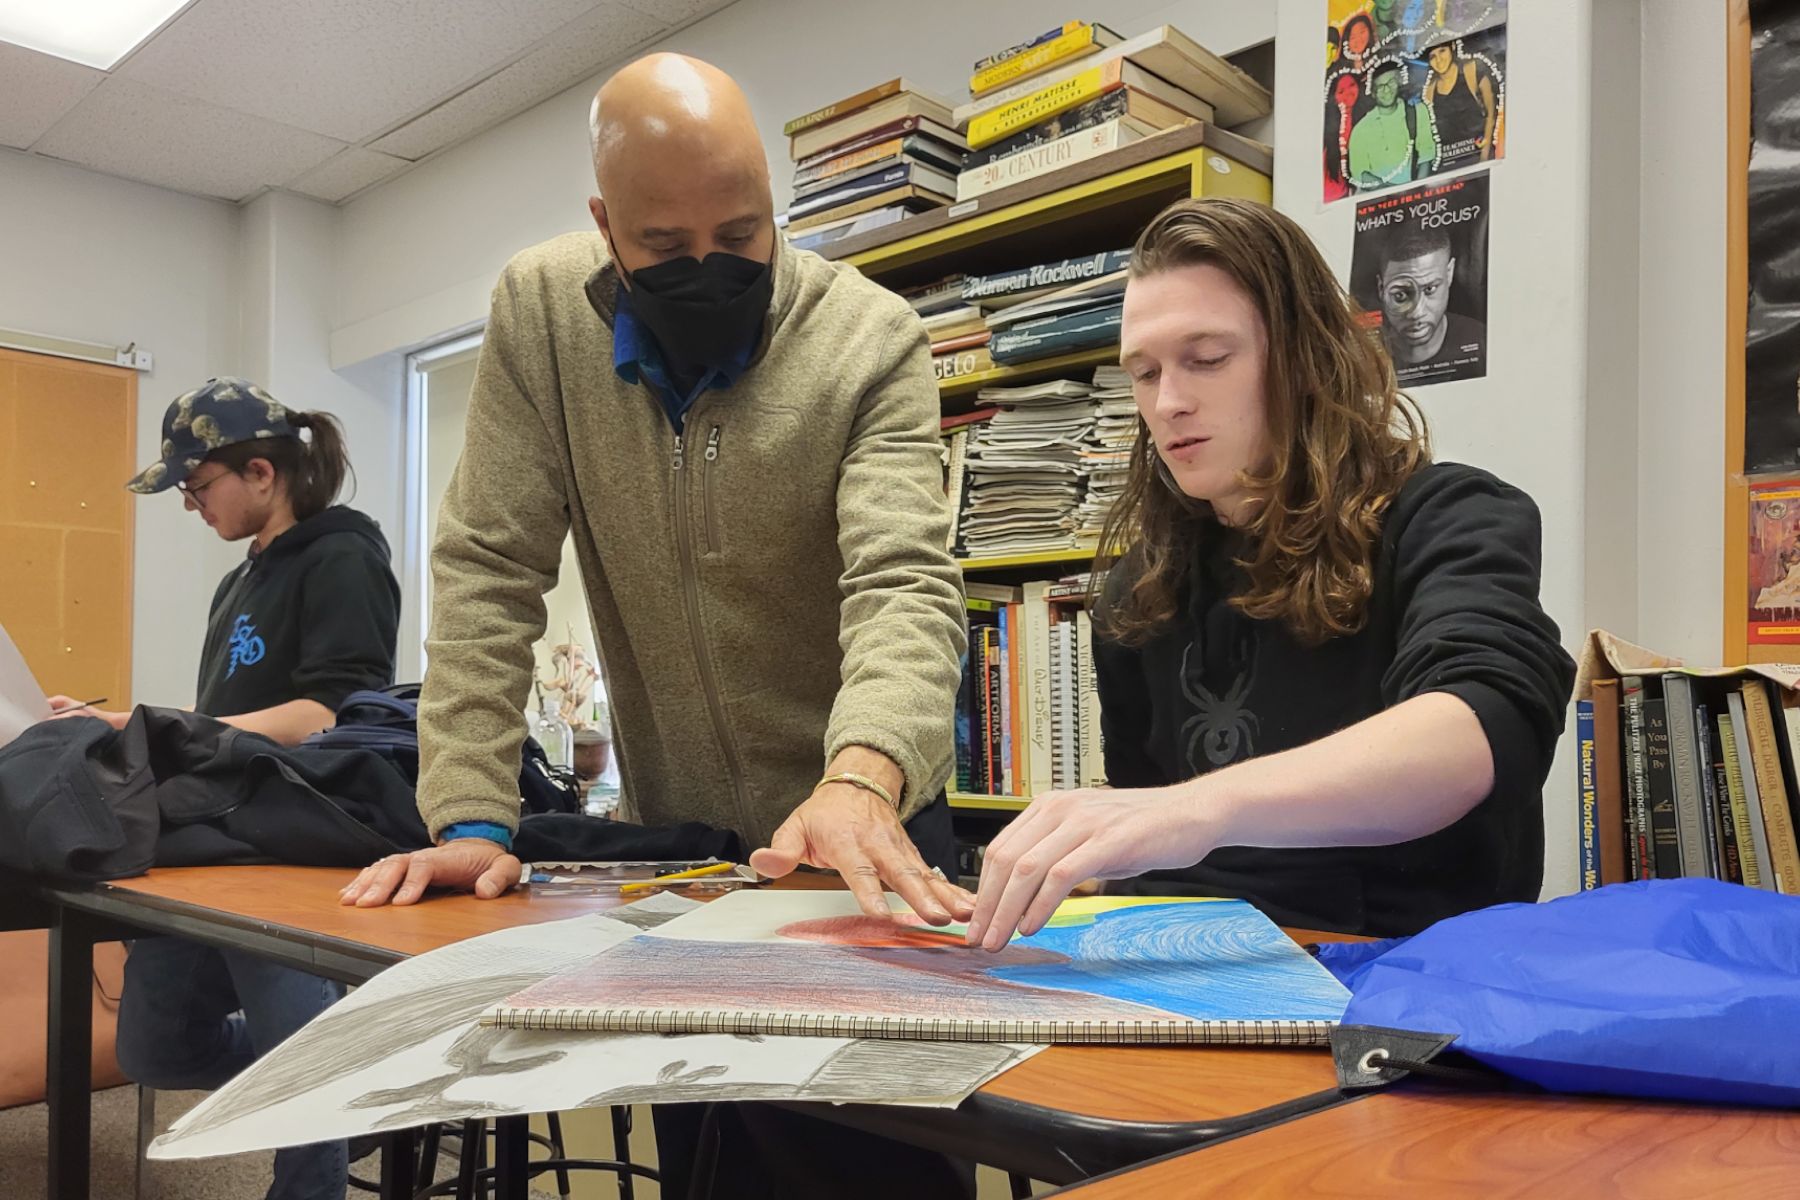 Stephen Tyson speaking with a student at art table as student works on a drawing